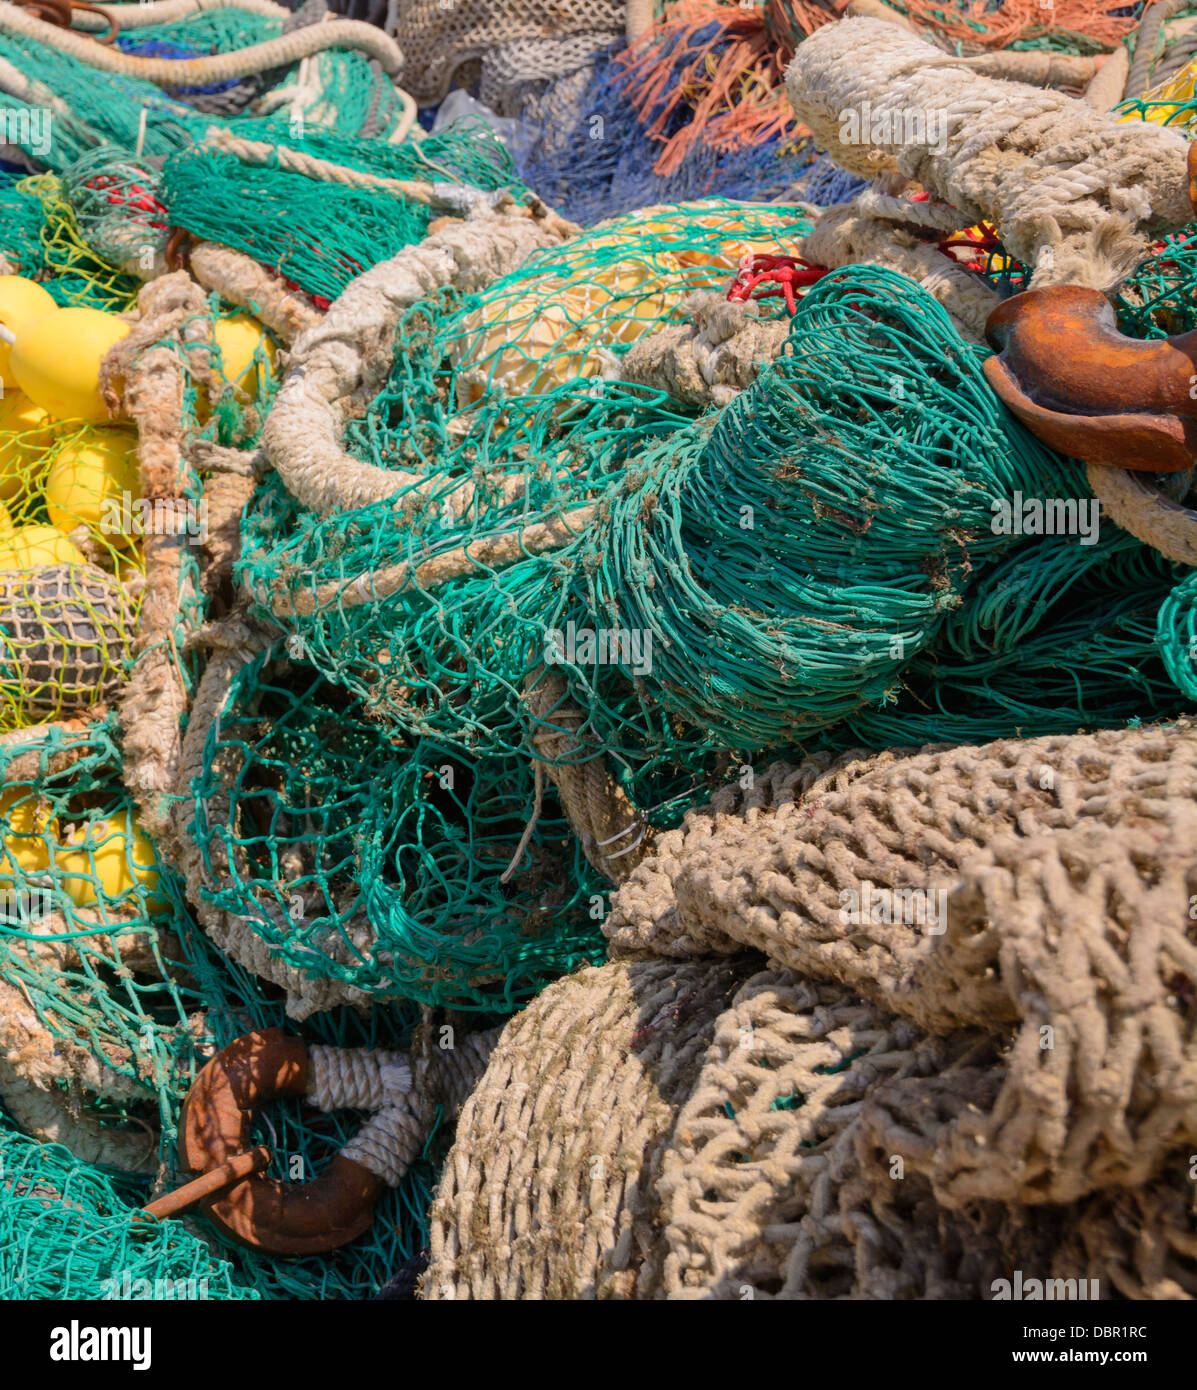 Colorful fisherman's nets with knots and nets closeup. Stock Photo